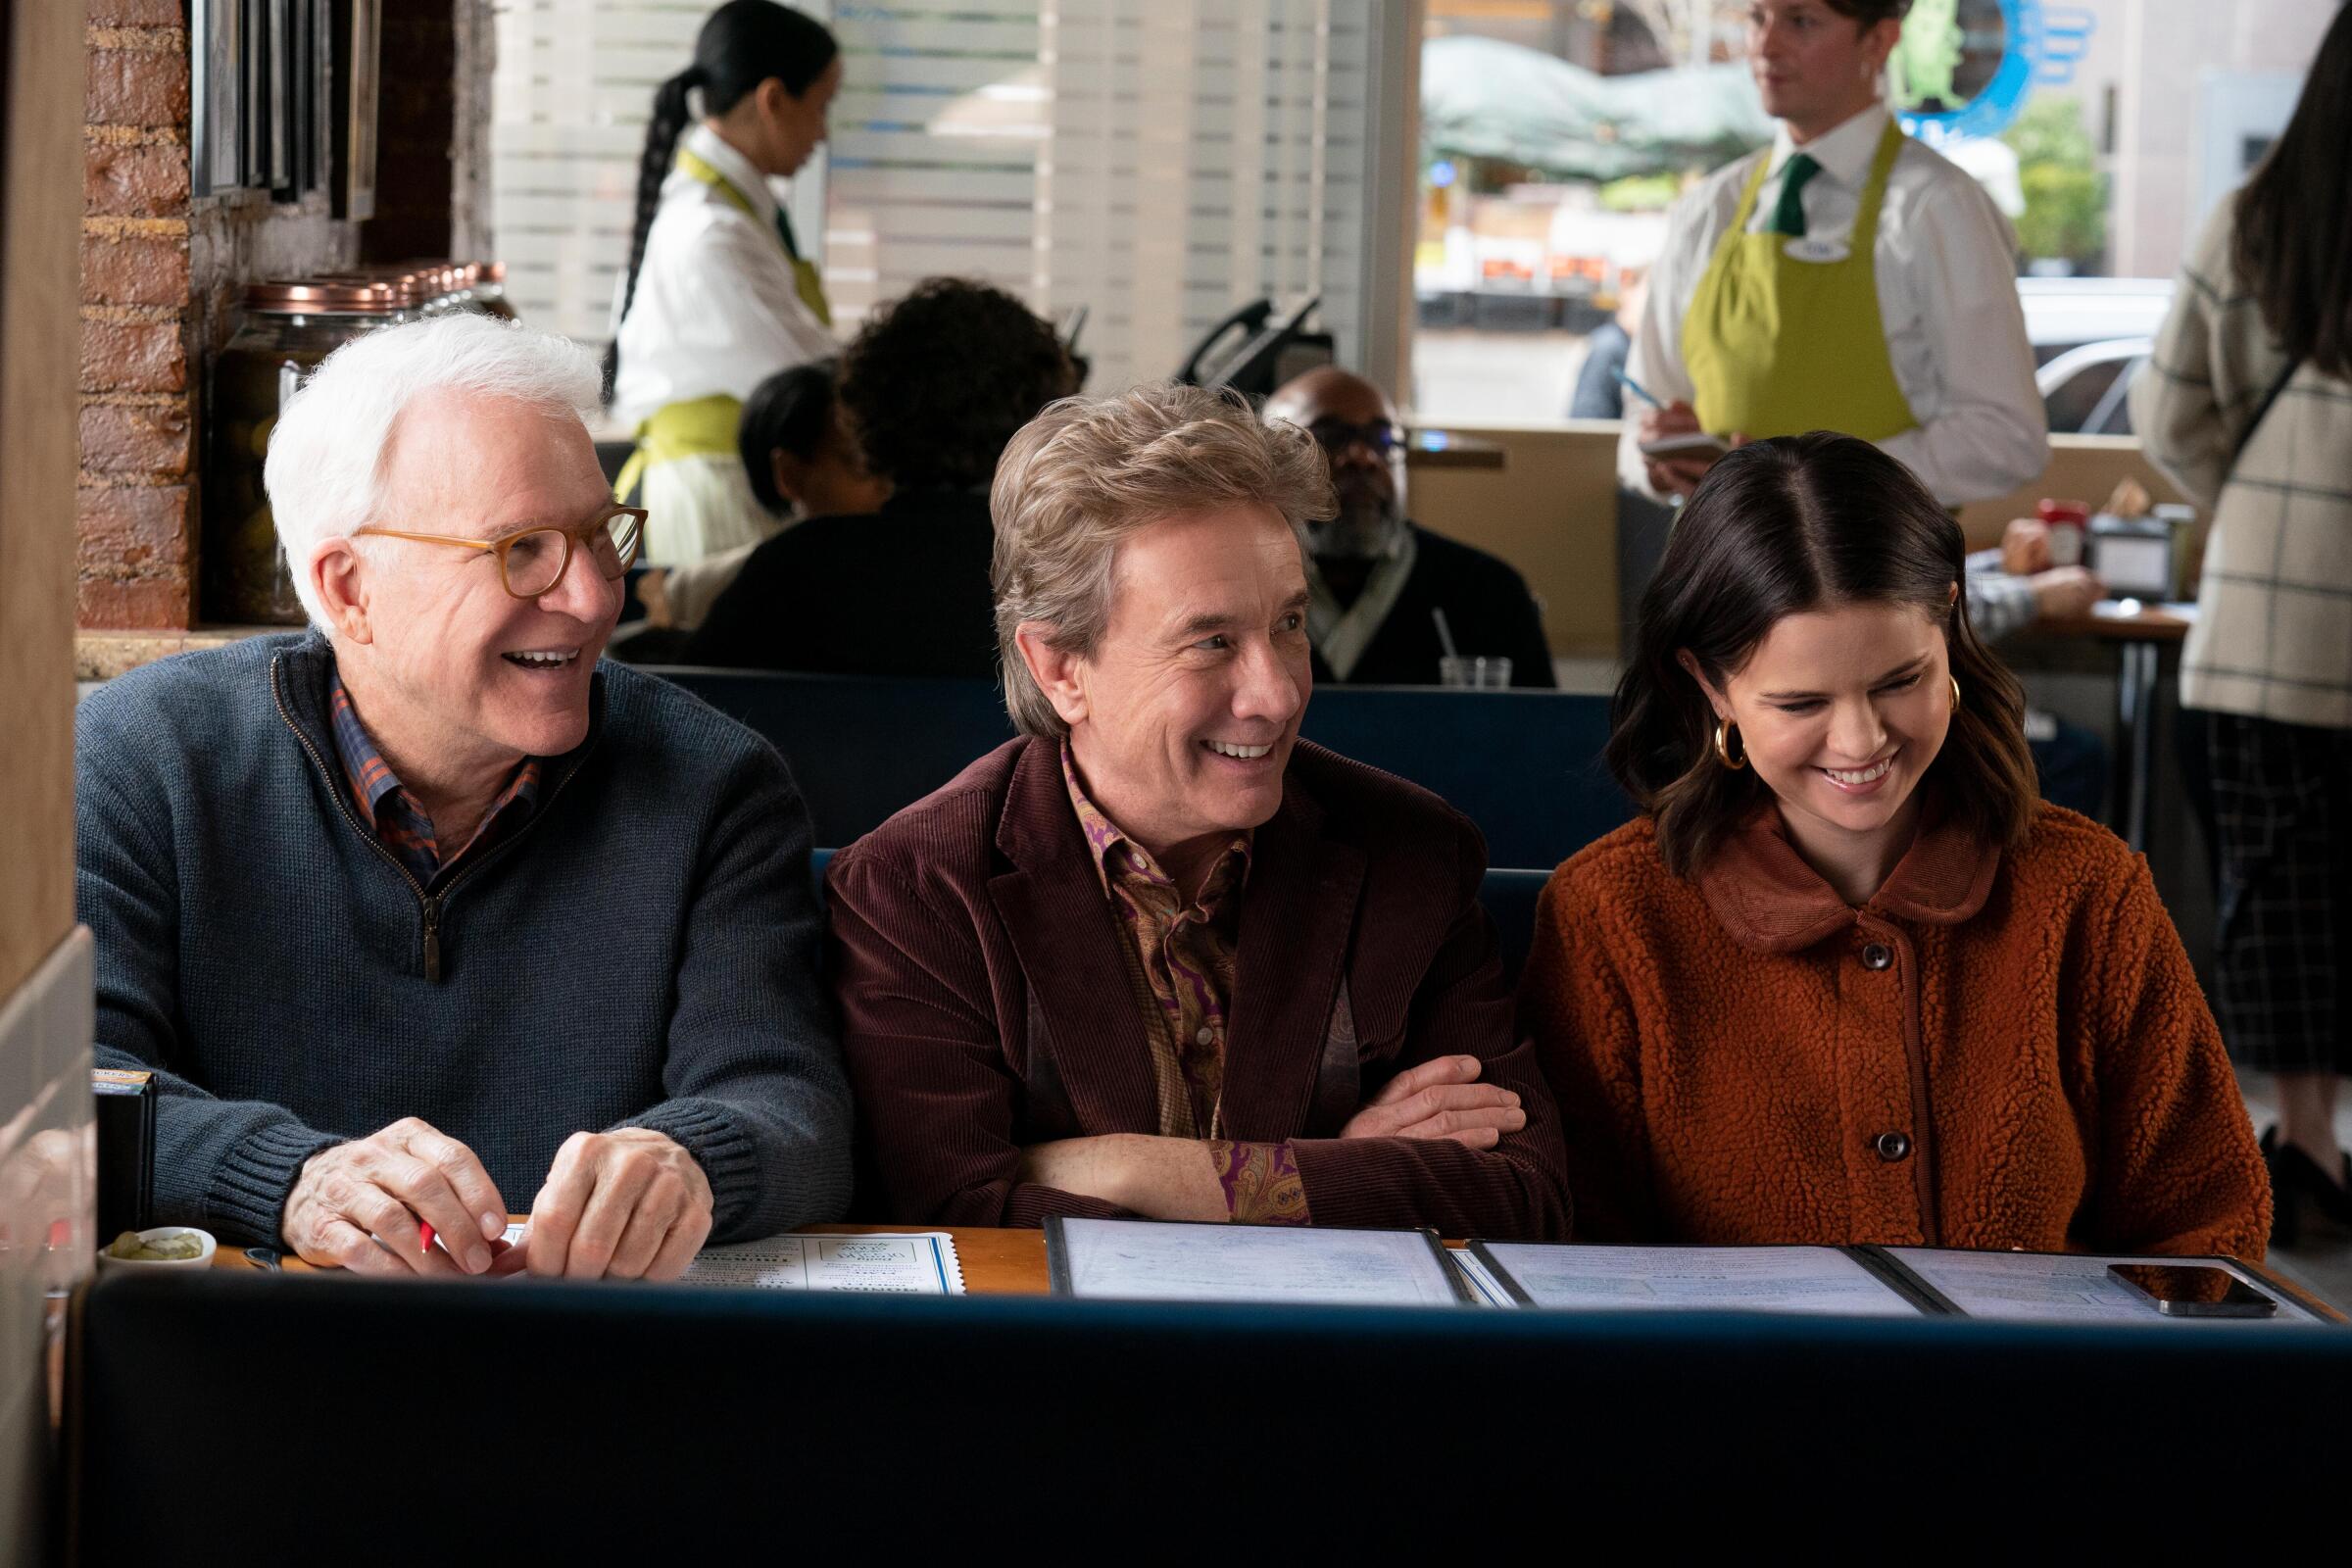 Two older men and a younger woman sit at a diner booth smiling in a scene from "Only Murders in the Building."